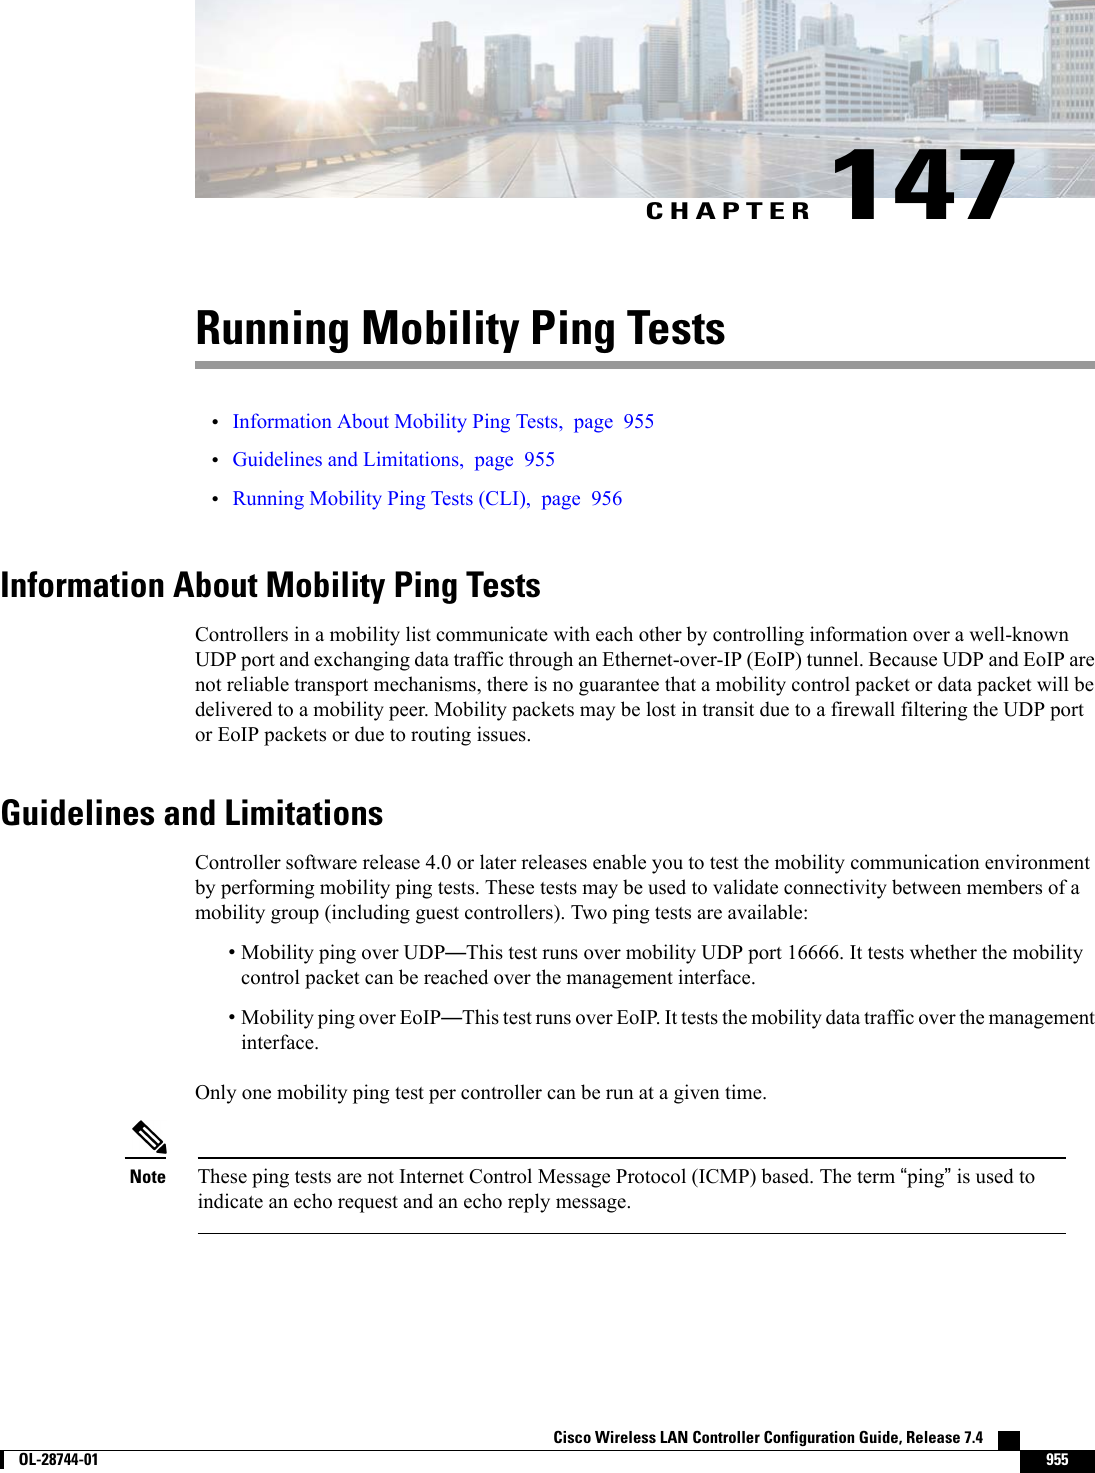 CHAPTER 147Running Mobility Ping Tests•Information About Mobility Ping Tests, page 955•Guidelines and Limitations, page 955•Running Mobility Ping Tests (CLI), page 956Information About Mobility Ping TestsControllers in a mobility list communicate with each other by controlling information over a well-knownUDP port and exchanging data traffic through an Ethernet-over-IP (EoIP) tunnel. Because UDP and EoIP arenot reliable transport mechanisms, there is no guarantee that a mobility control packet or data packet will bedelivered to a mobility peer. Mobility packets may be lost in transit due to a firewall filtering the UDP portor EoIP packets or due to routing issues.Guidelines and LimitationsController software release 4.0 or later releases enable you to test the mobility communication environmentby performing mobility ping tests. These tests may be used to validate connectivity between members of amobility group (including guest controllers). Two ping tests are available:•Mobility ping over UDP—This test runs over mobility UDP port 16666. It tests whether the mobilitycontrol packet can be reached over the management interface.•Mobility ping over EoIP—This test runs over EoIP. It tests the mobility data traffic over the managementinterface.Only one mobility ping test per controller can be run at a given time.These ping tests are not Internet Control Message Protocol (ICMP) based. The term “ping”is used toindicate an echo request and an echo reply message.NoteCisco Wireless LAN Controller Configuration Guide, Release 7.4        OL-28744-01 955